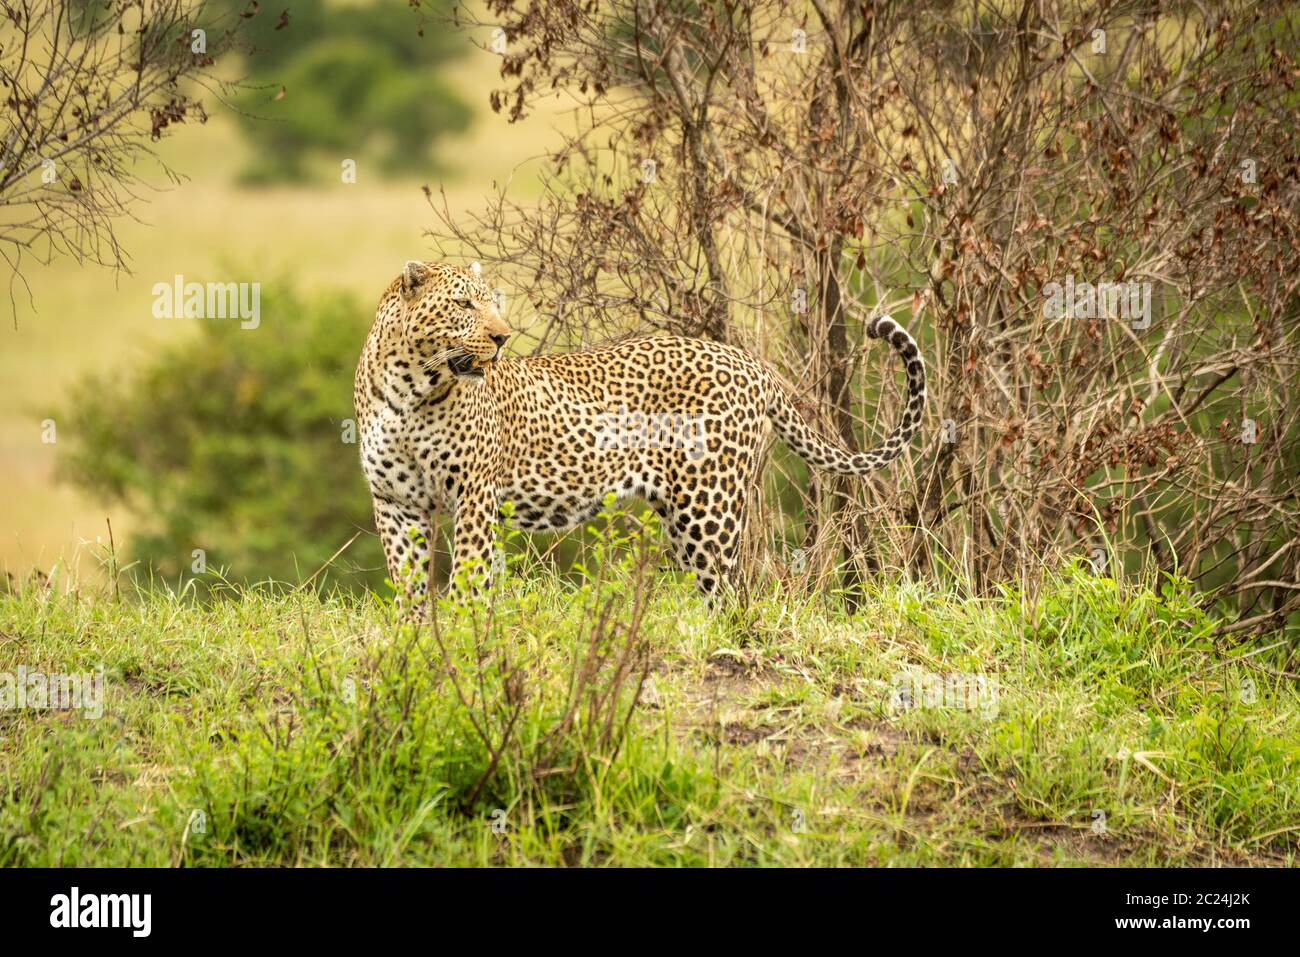 Leopard stands on grassy bank looking back Stock Photo